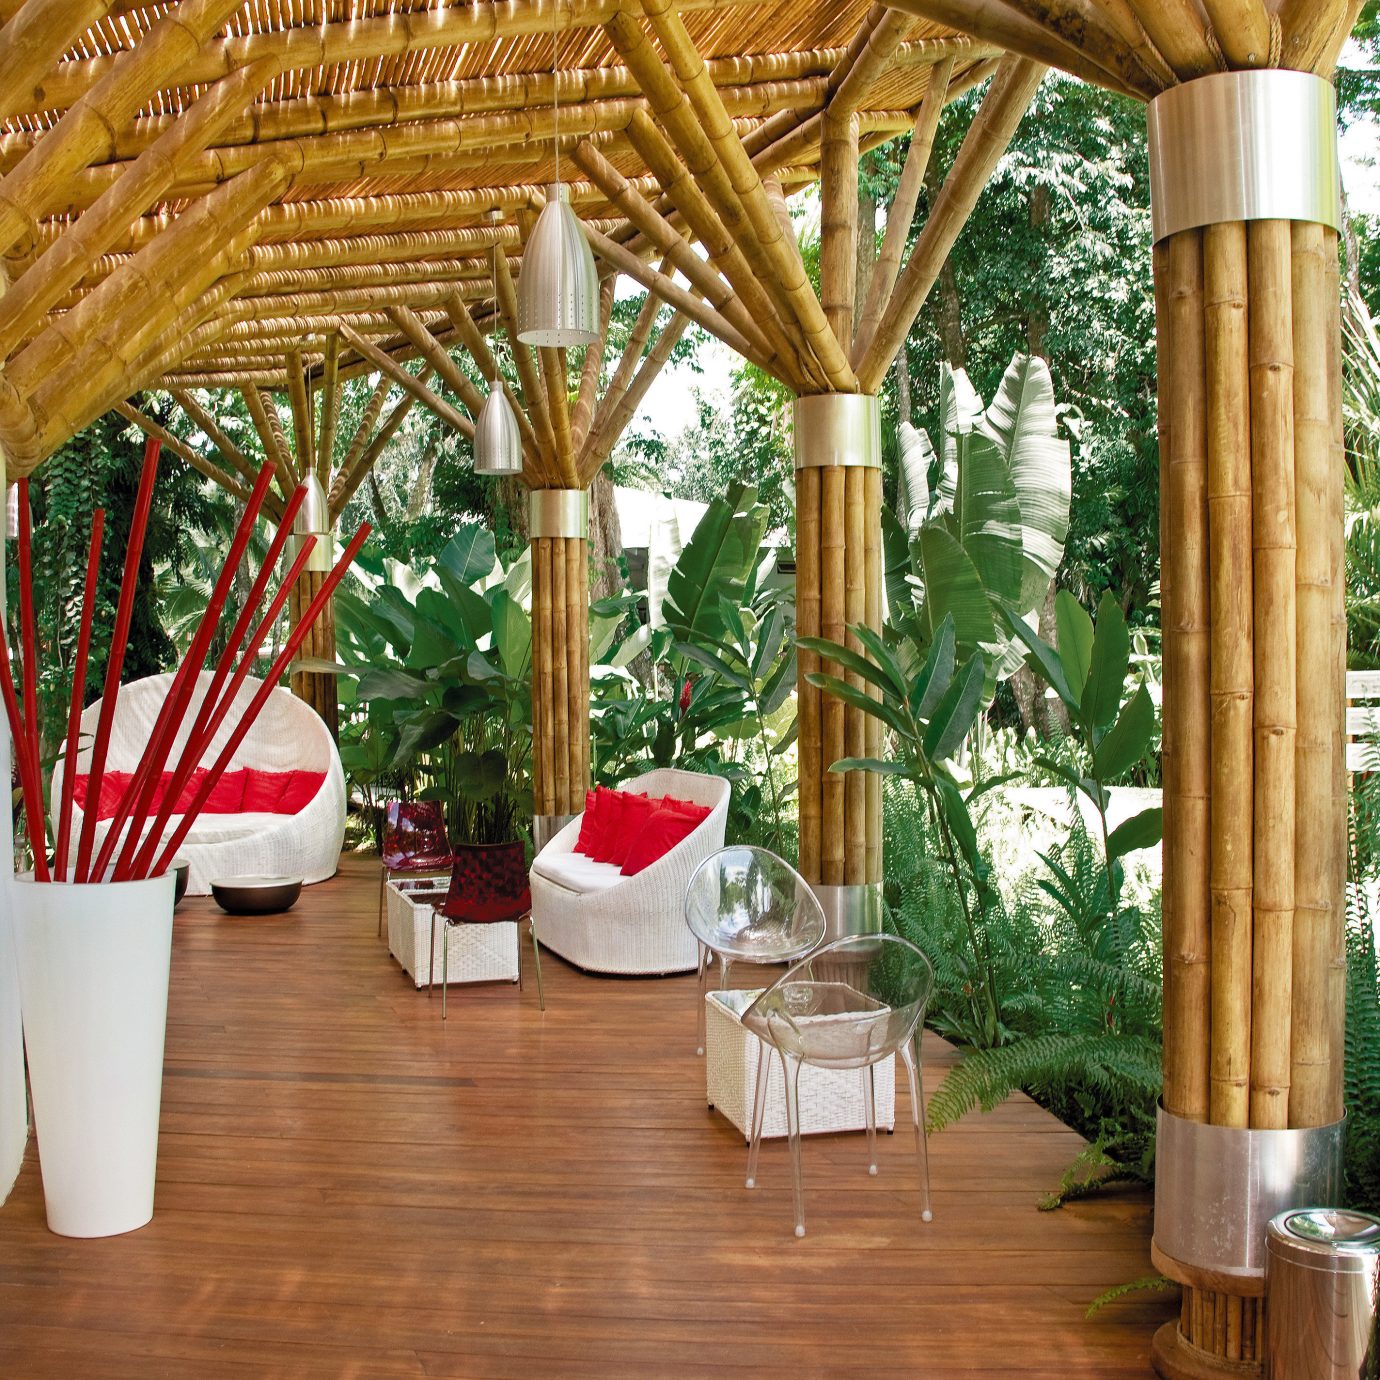 Bar Dining Drink Eat Luxury Tropical outdoor structure porch